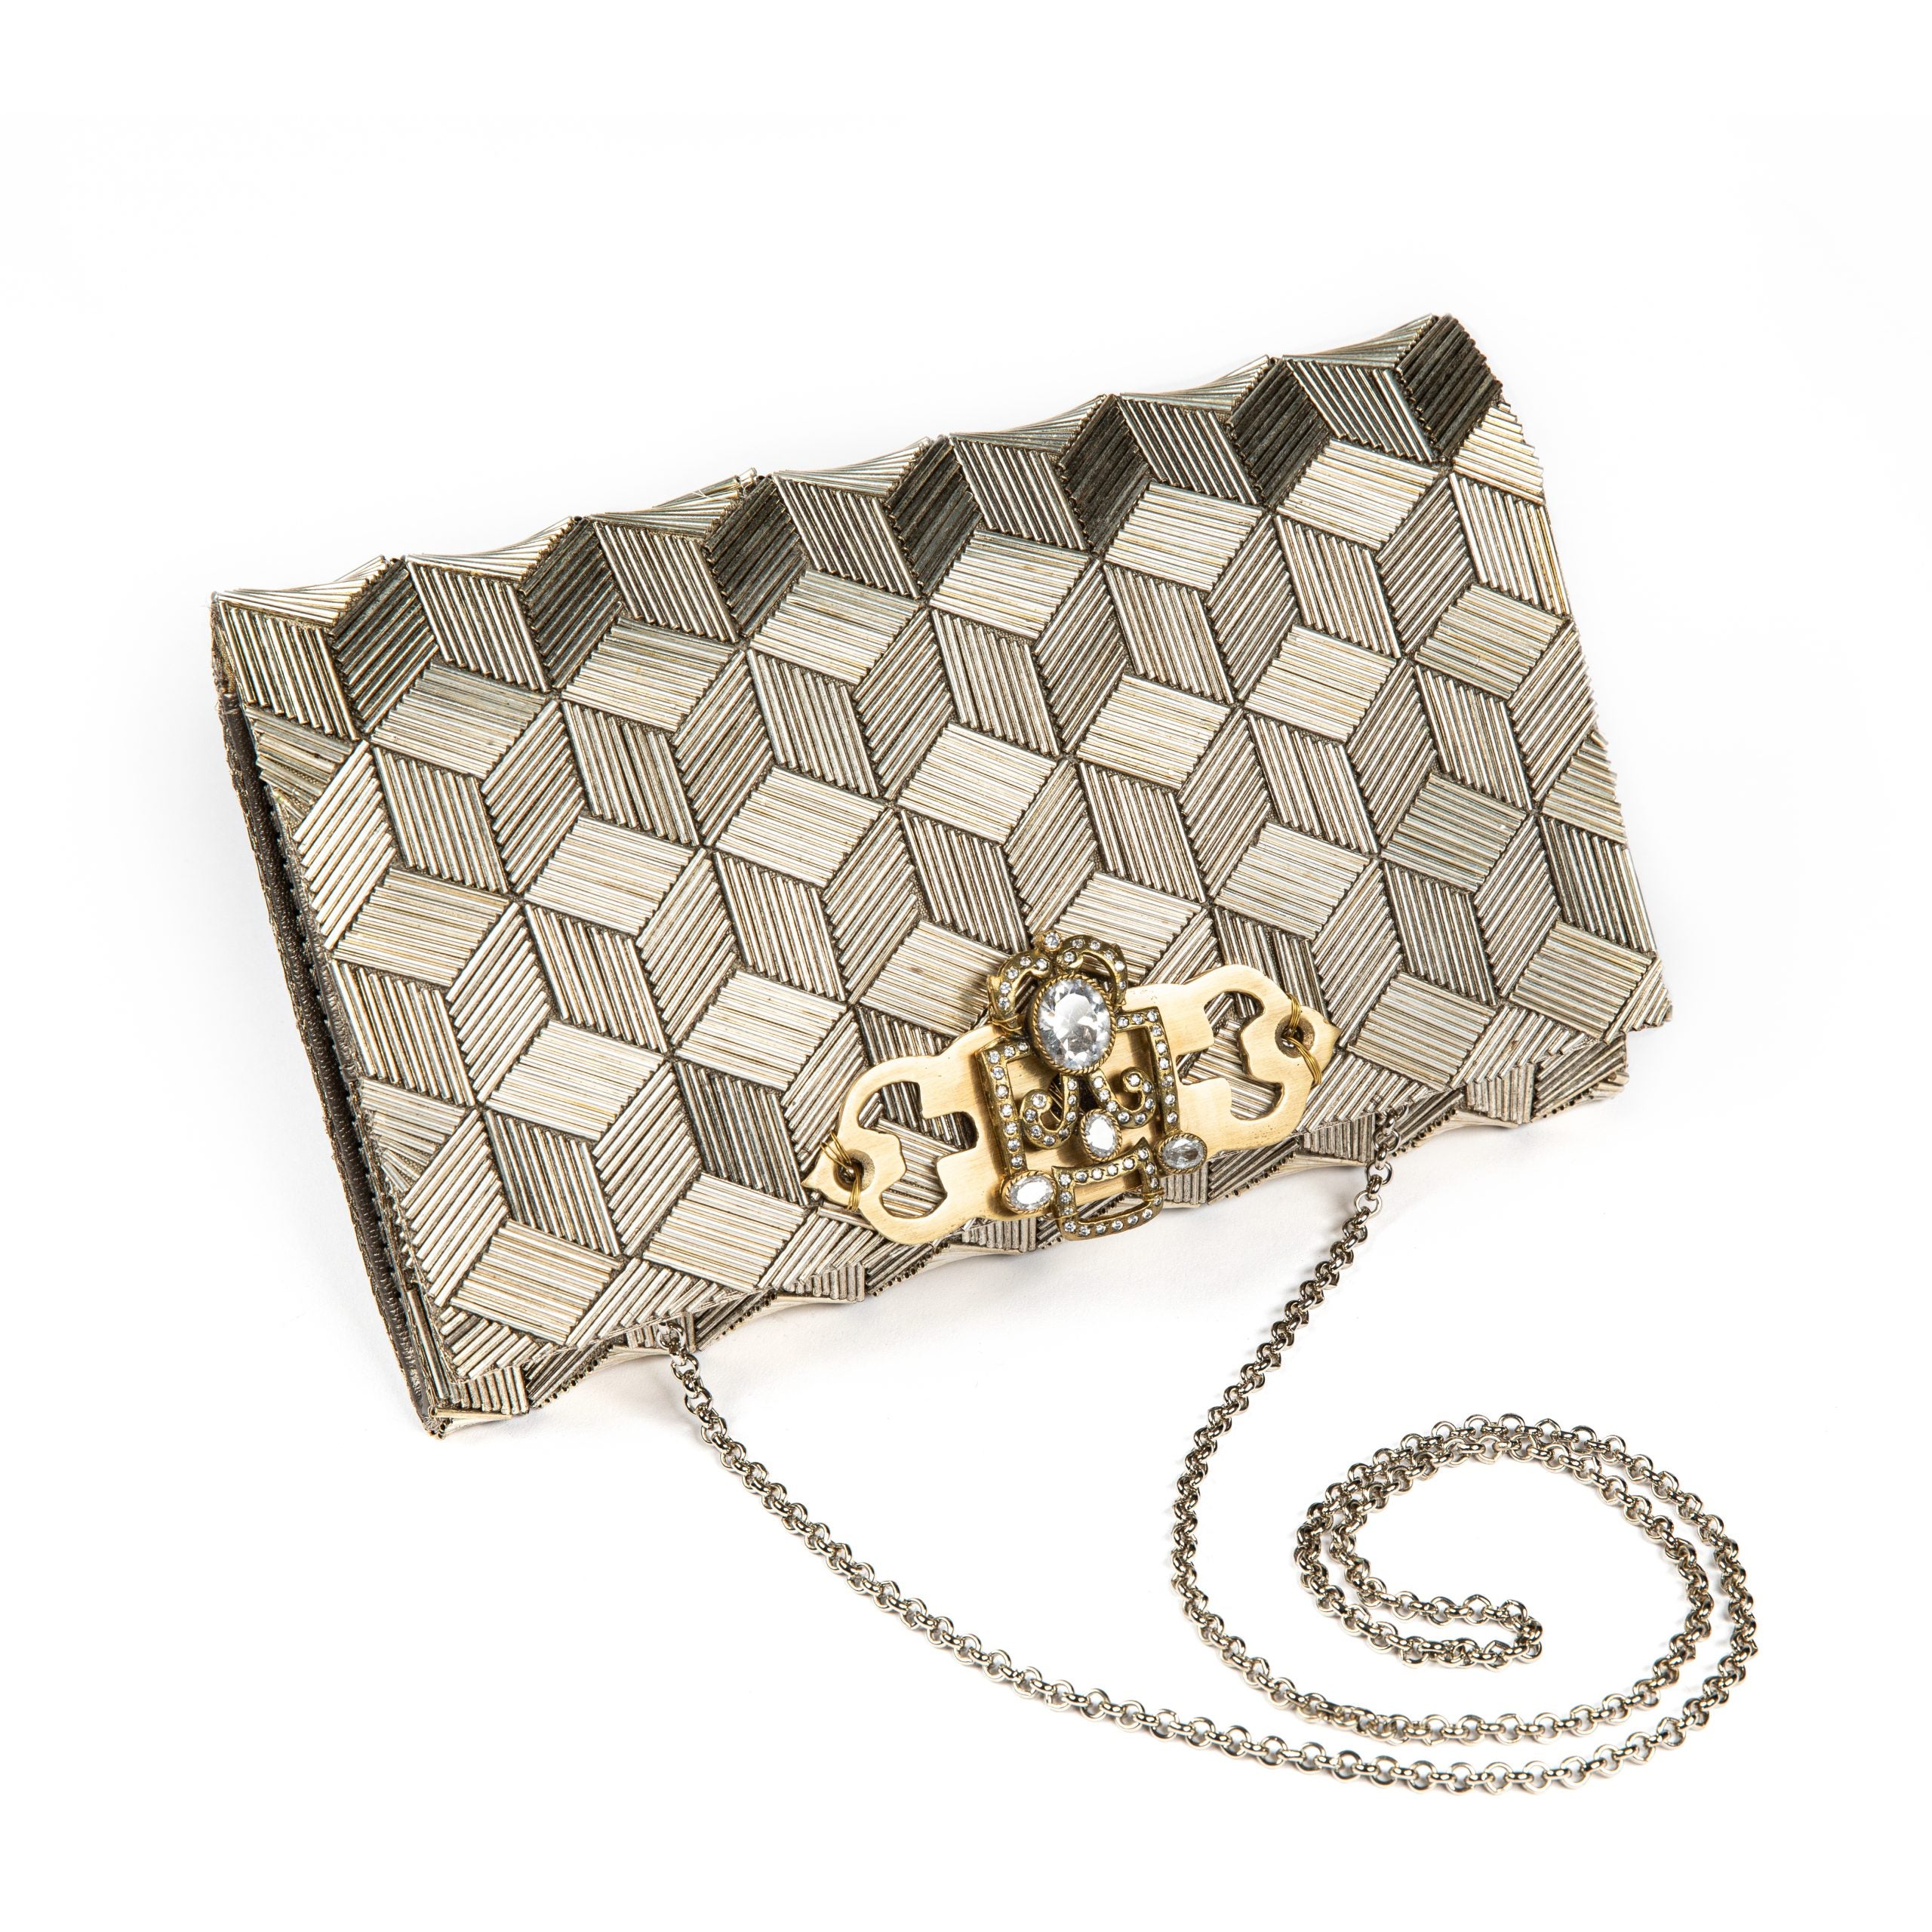 Handcrafted Clutch | The Serah Bag